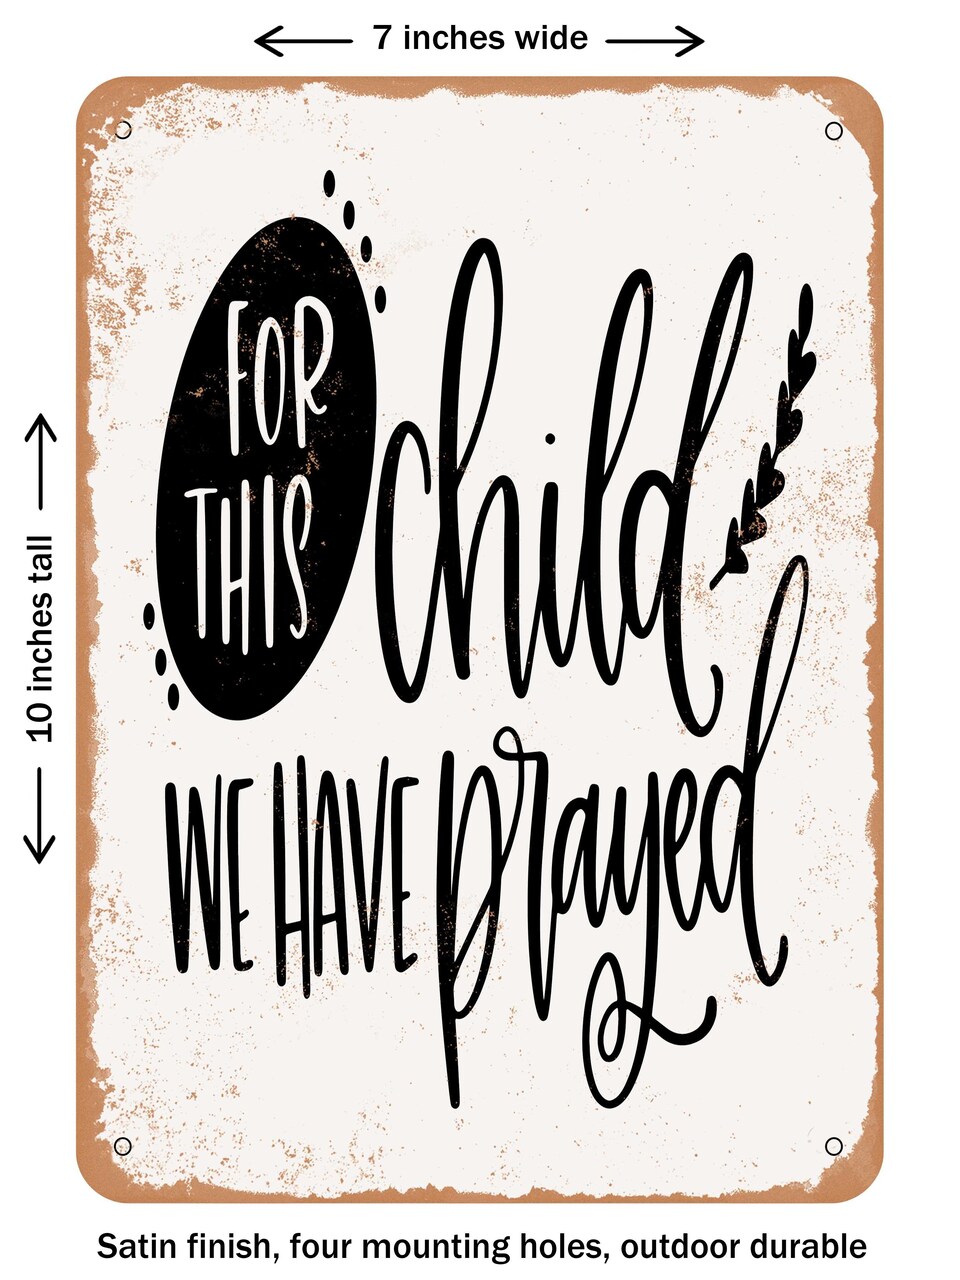 DECORATIVE METAL SIGN - For This Child  - Vintage Rusty Look